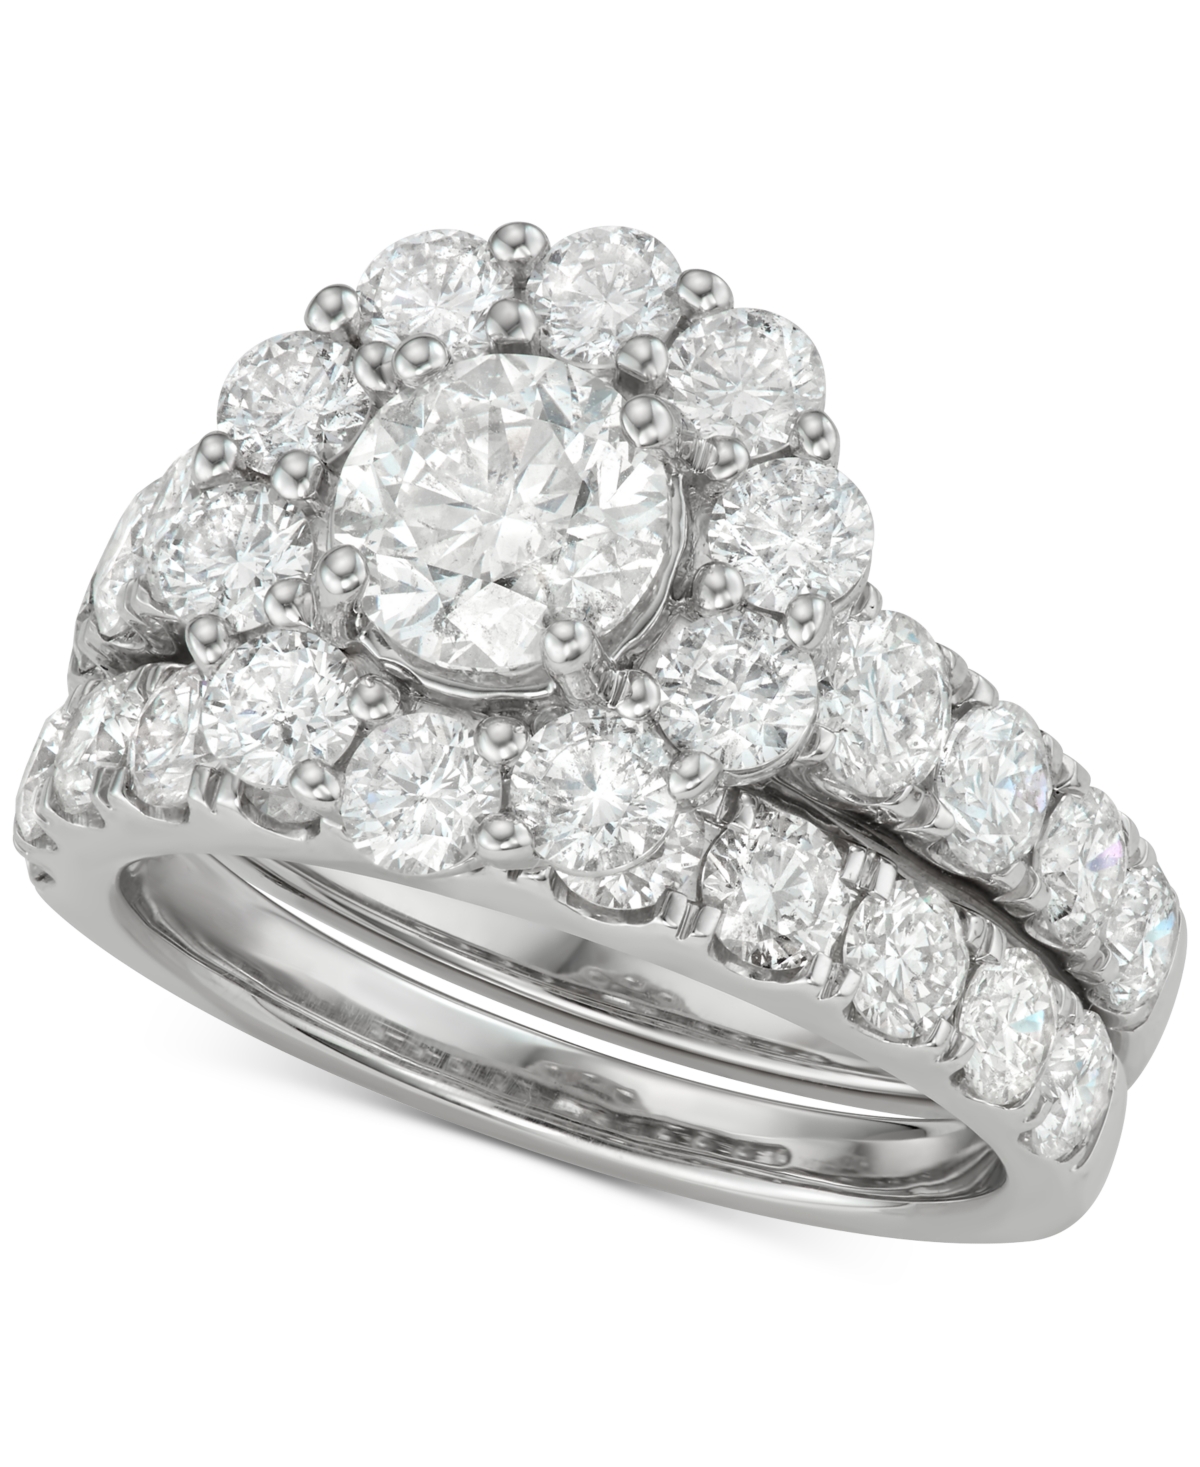 Certified Diamond Bridal Set (4 ct. t.w.) in 18k White, Yellow or Rose Gold - White Gold